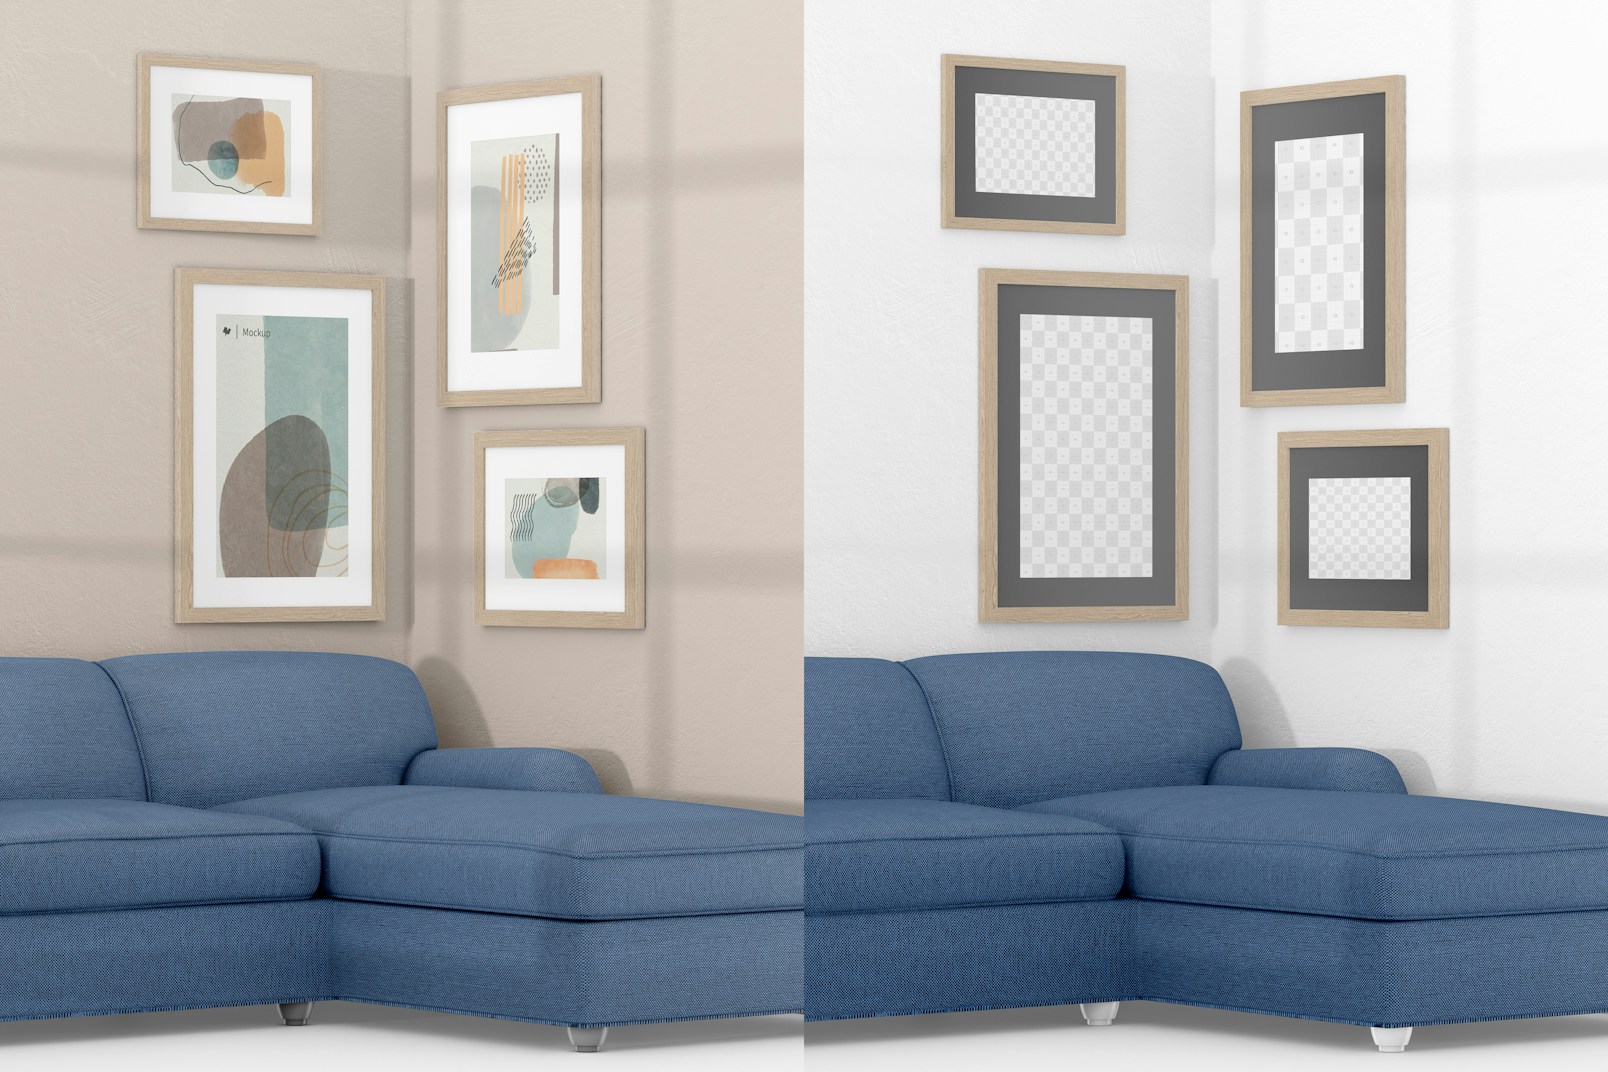 Gallery Frames Mockup, with Sofa 02